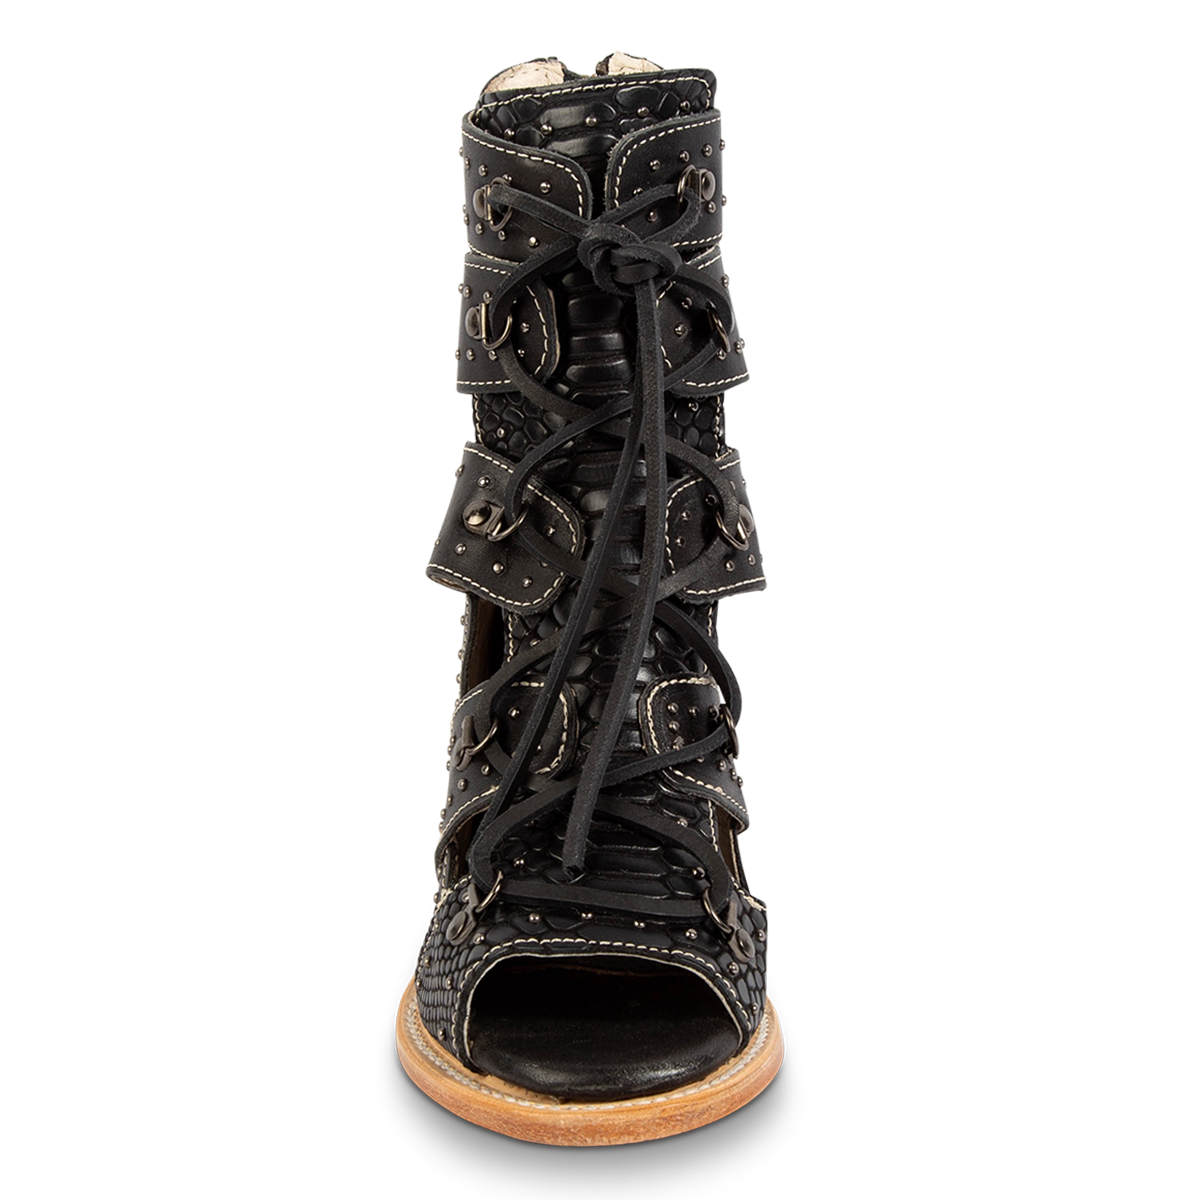 Front view showing leather criss cross lacing, an open toe construction and stud embellishments on FREEBIRD women's Brandy black snake embossed leather sandal